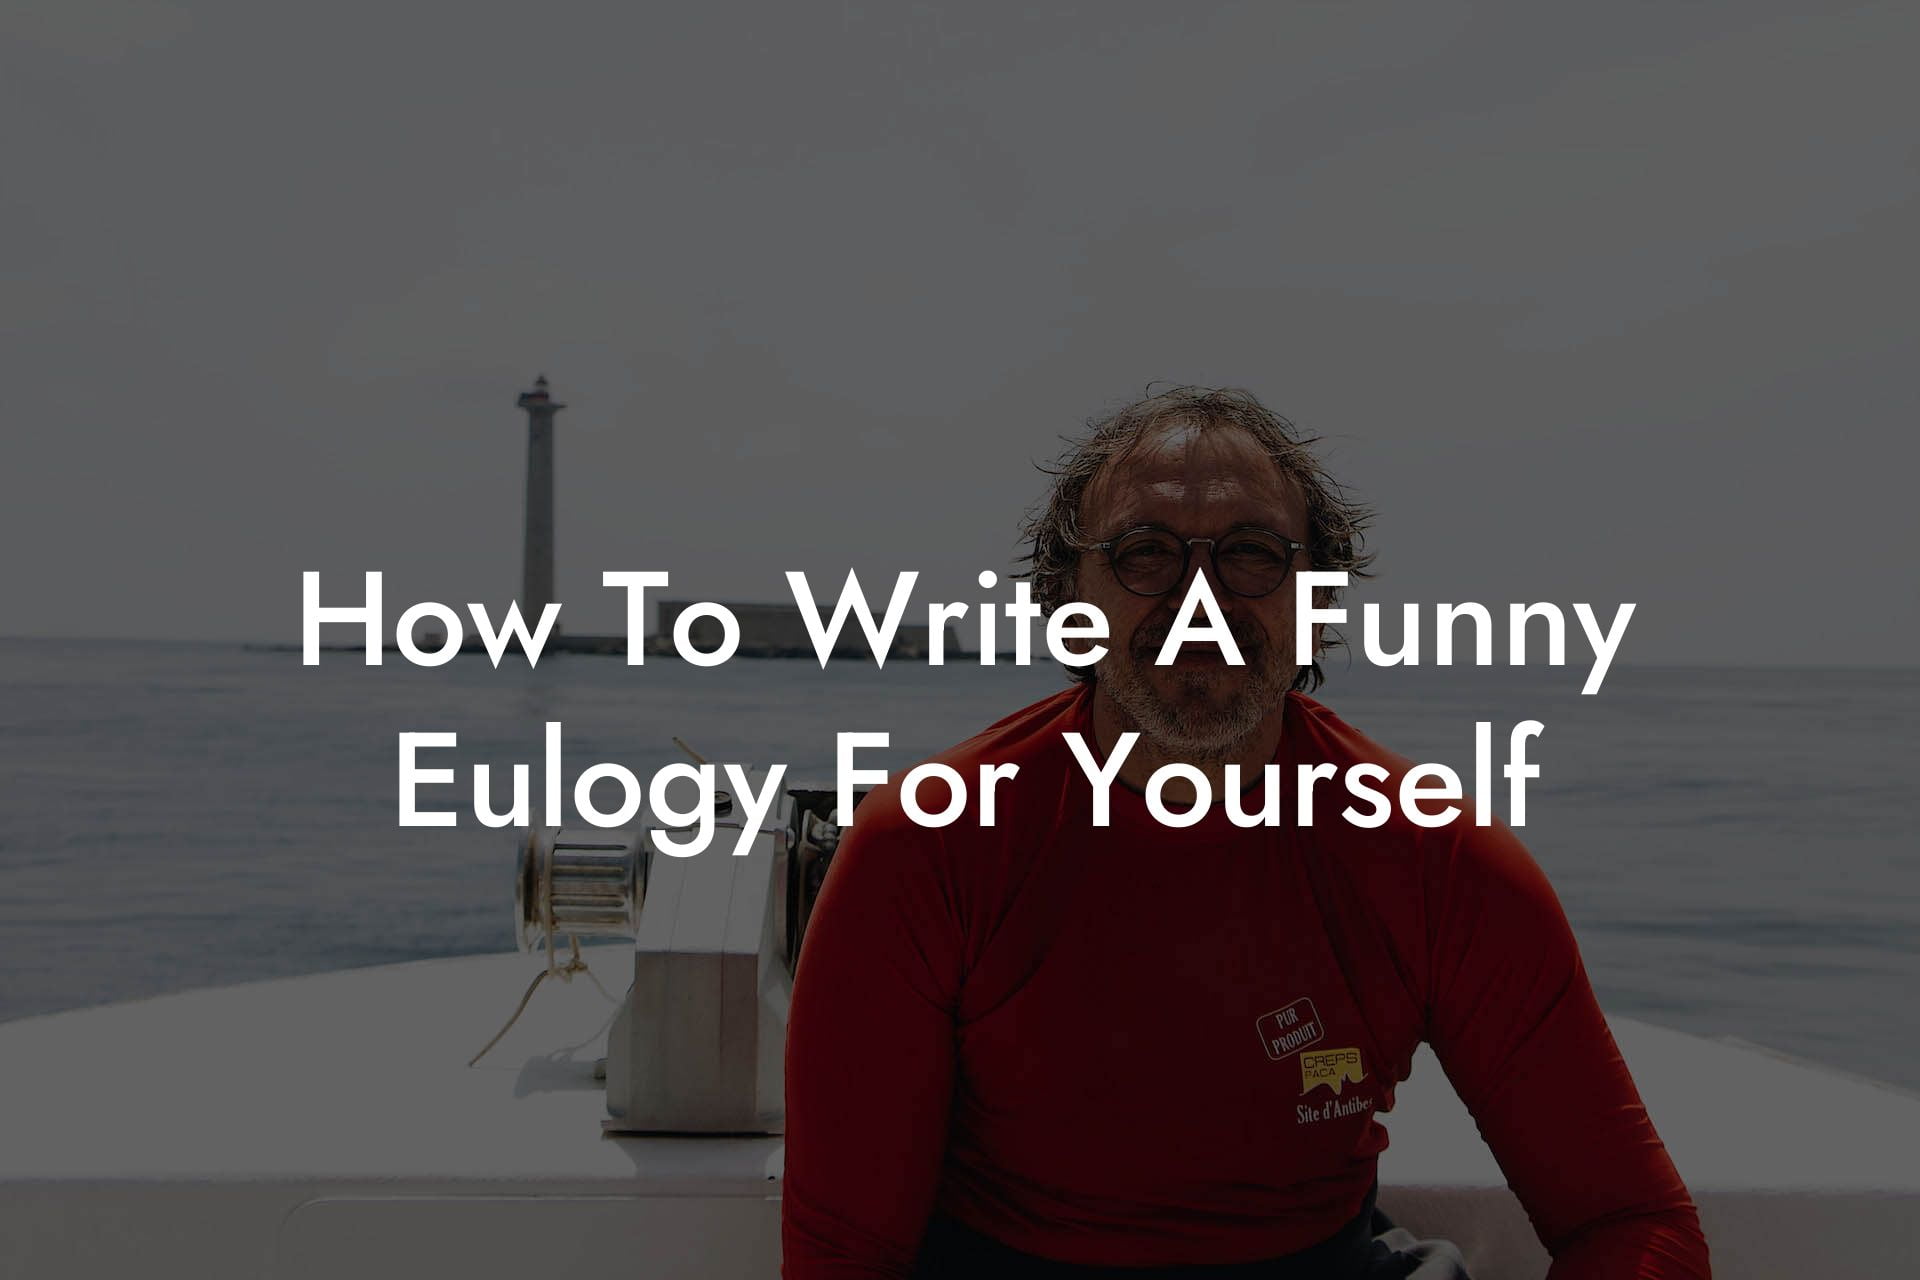 How To Write A Funny Eulogy For Yourself